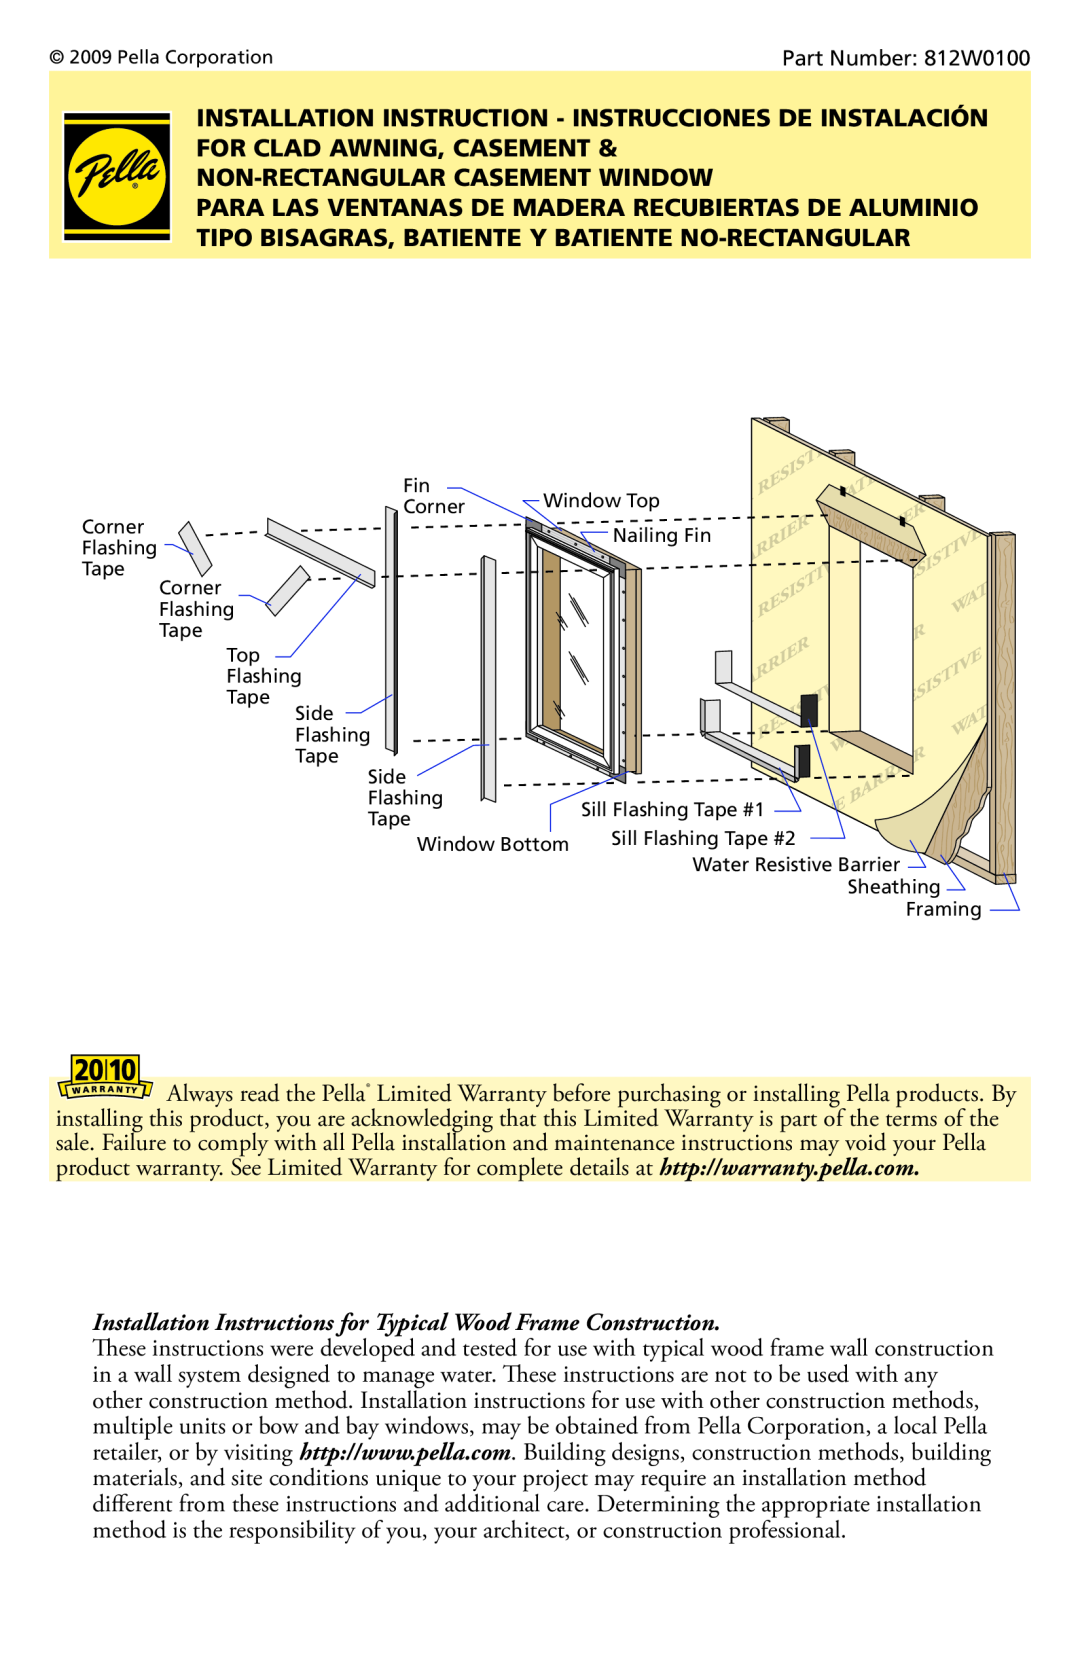 Pella 812W0100 installation instructions Installation Instructions for Typical Wood Frame Construction 